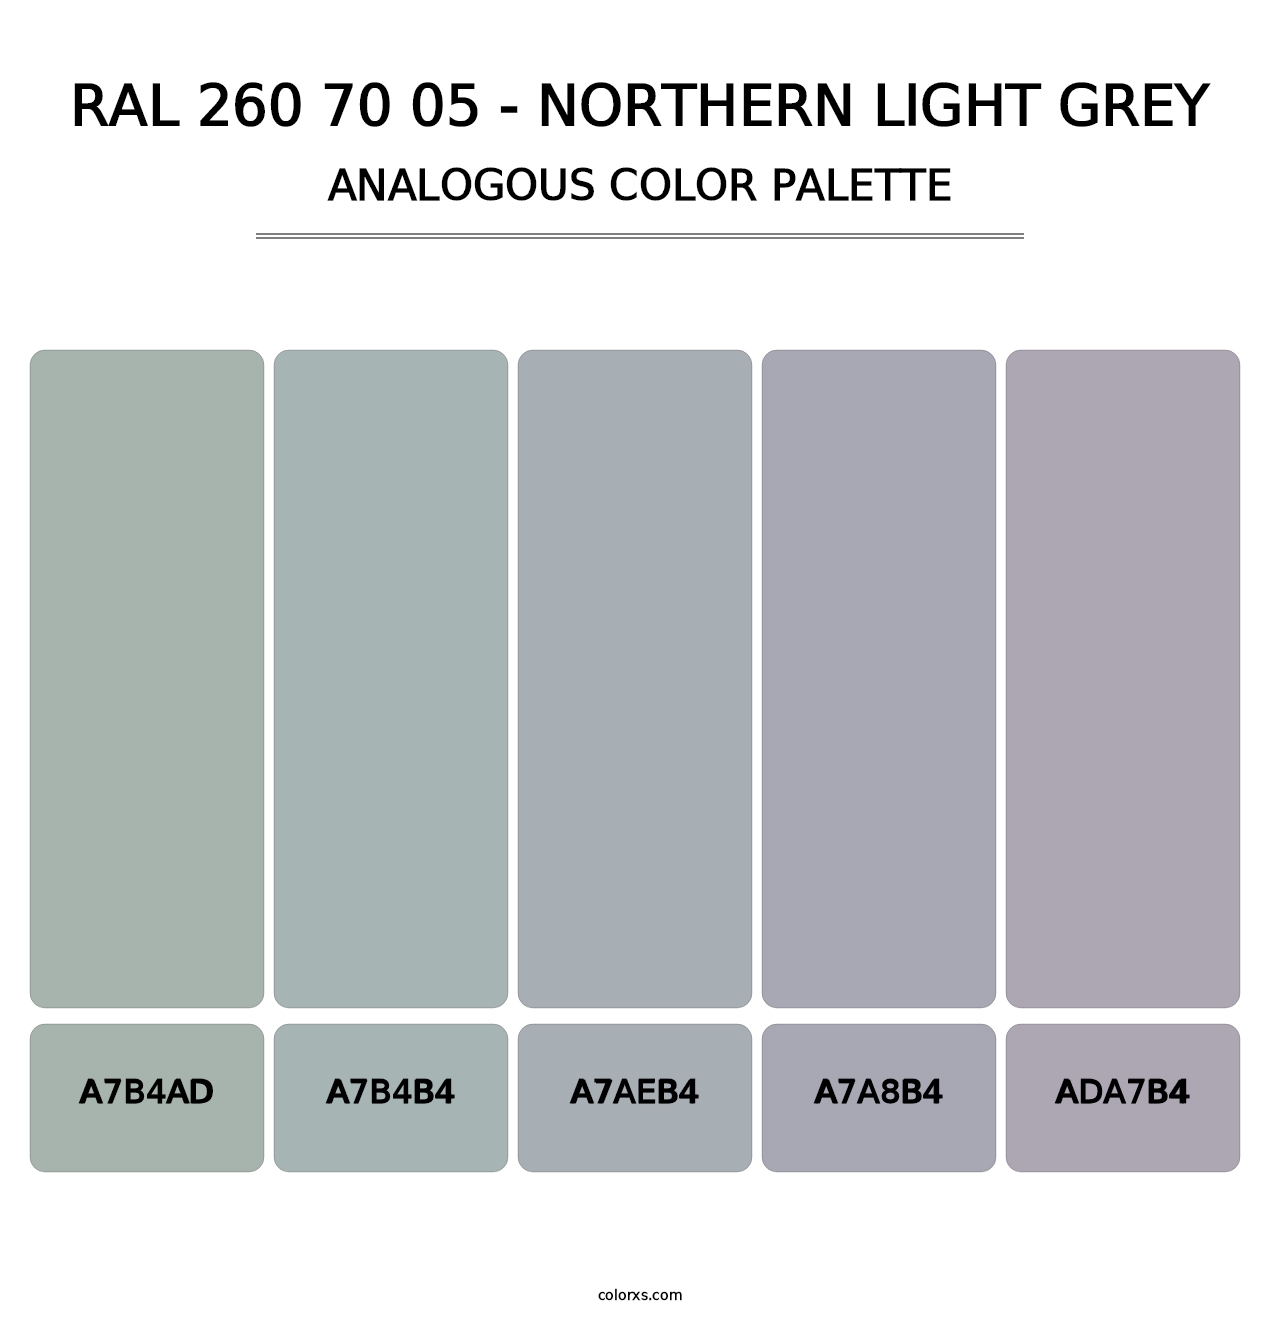 RAL 260 70 05 - Northern Light Grey - Analogous Color Palette